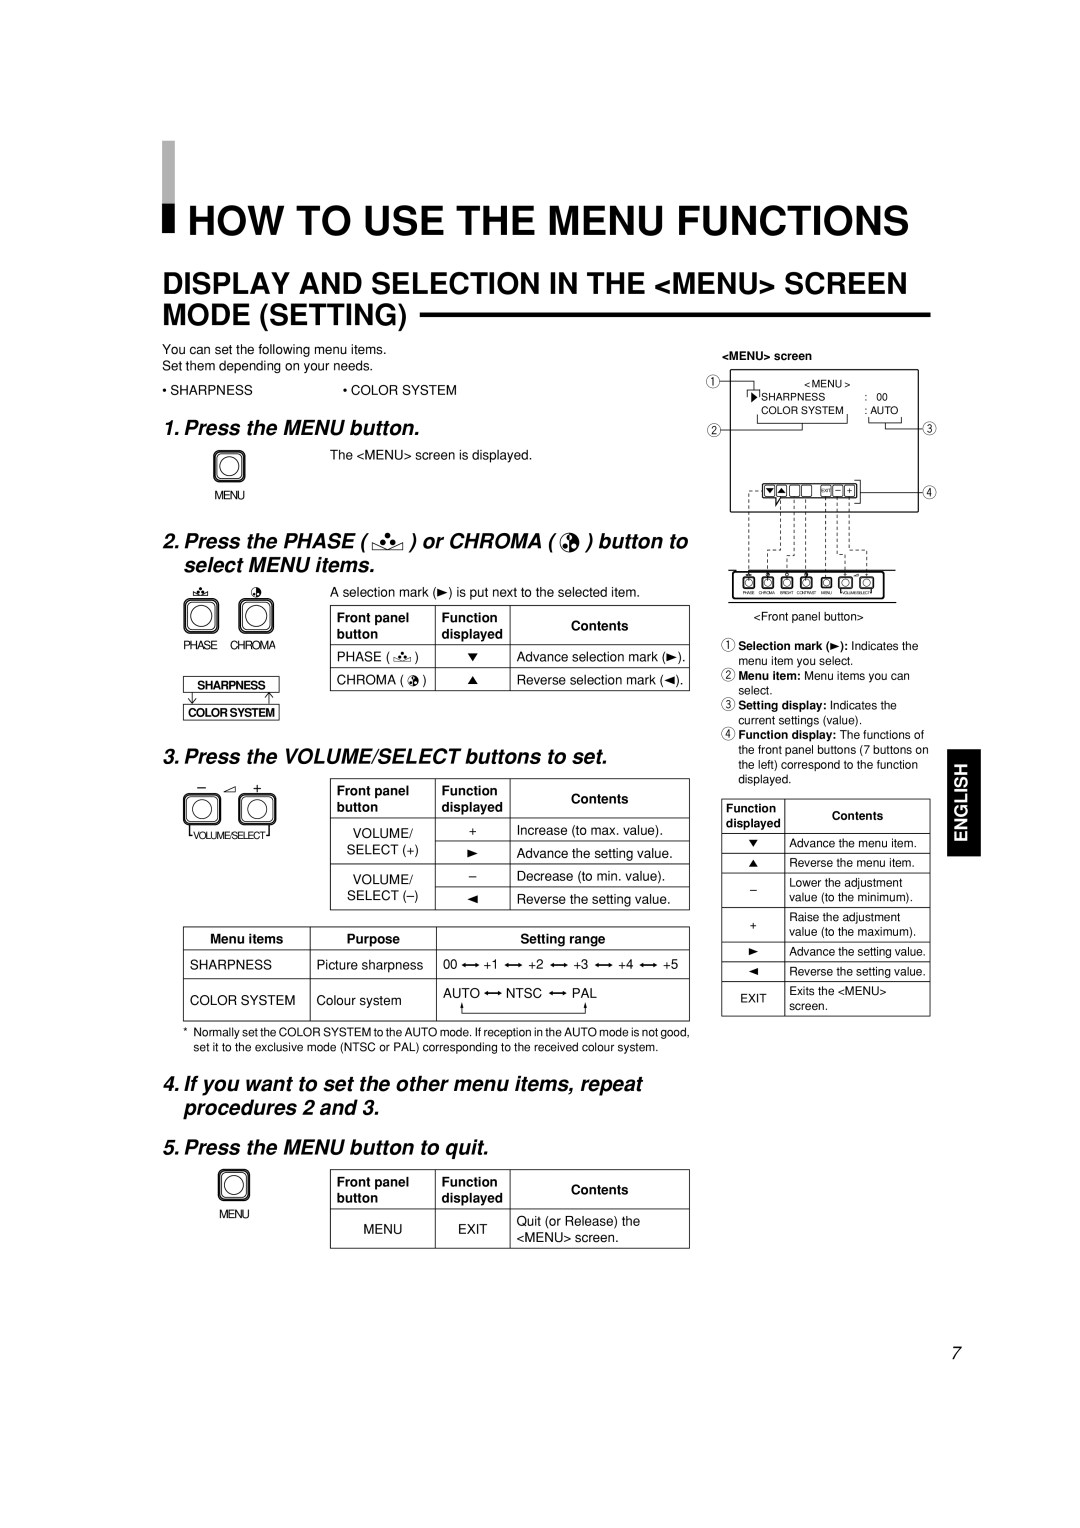 JVC LCT2141-001A-H manual How To Use The Menu Functions, Display And Selection In The Menu Screen Mode Setting, English 